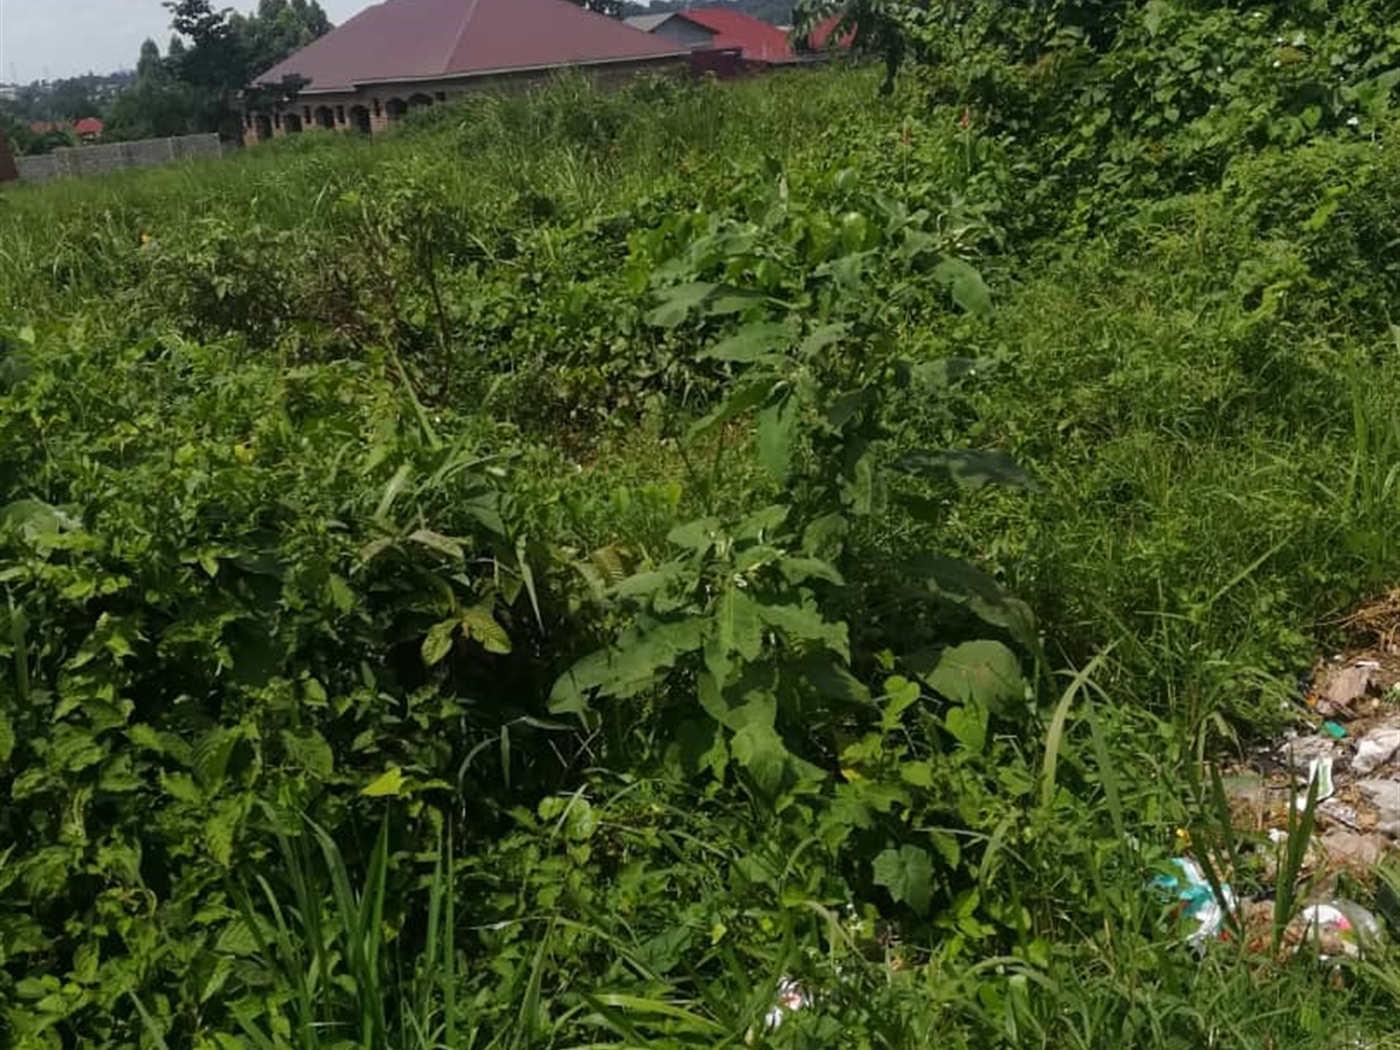 Residential Land for sale in Nsuube Mukono